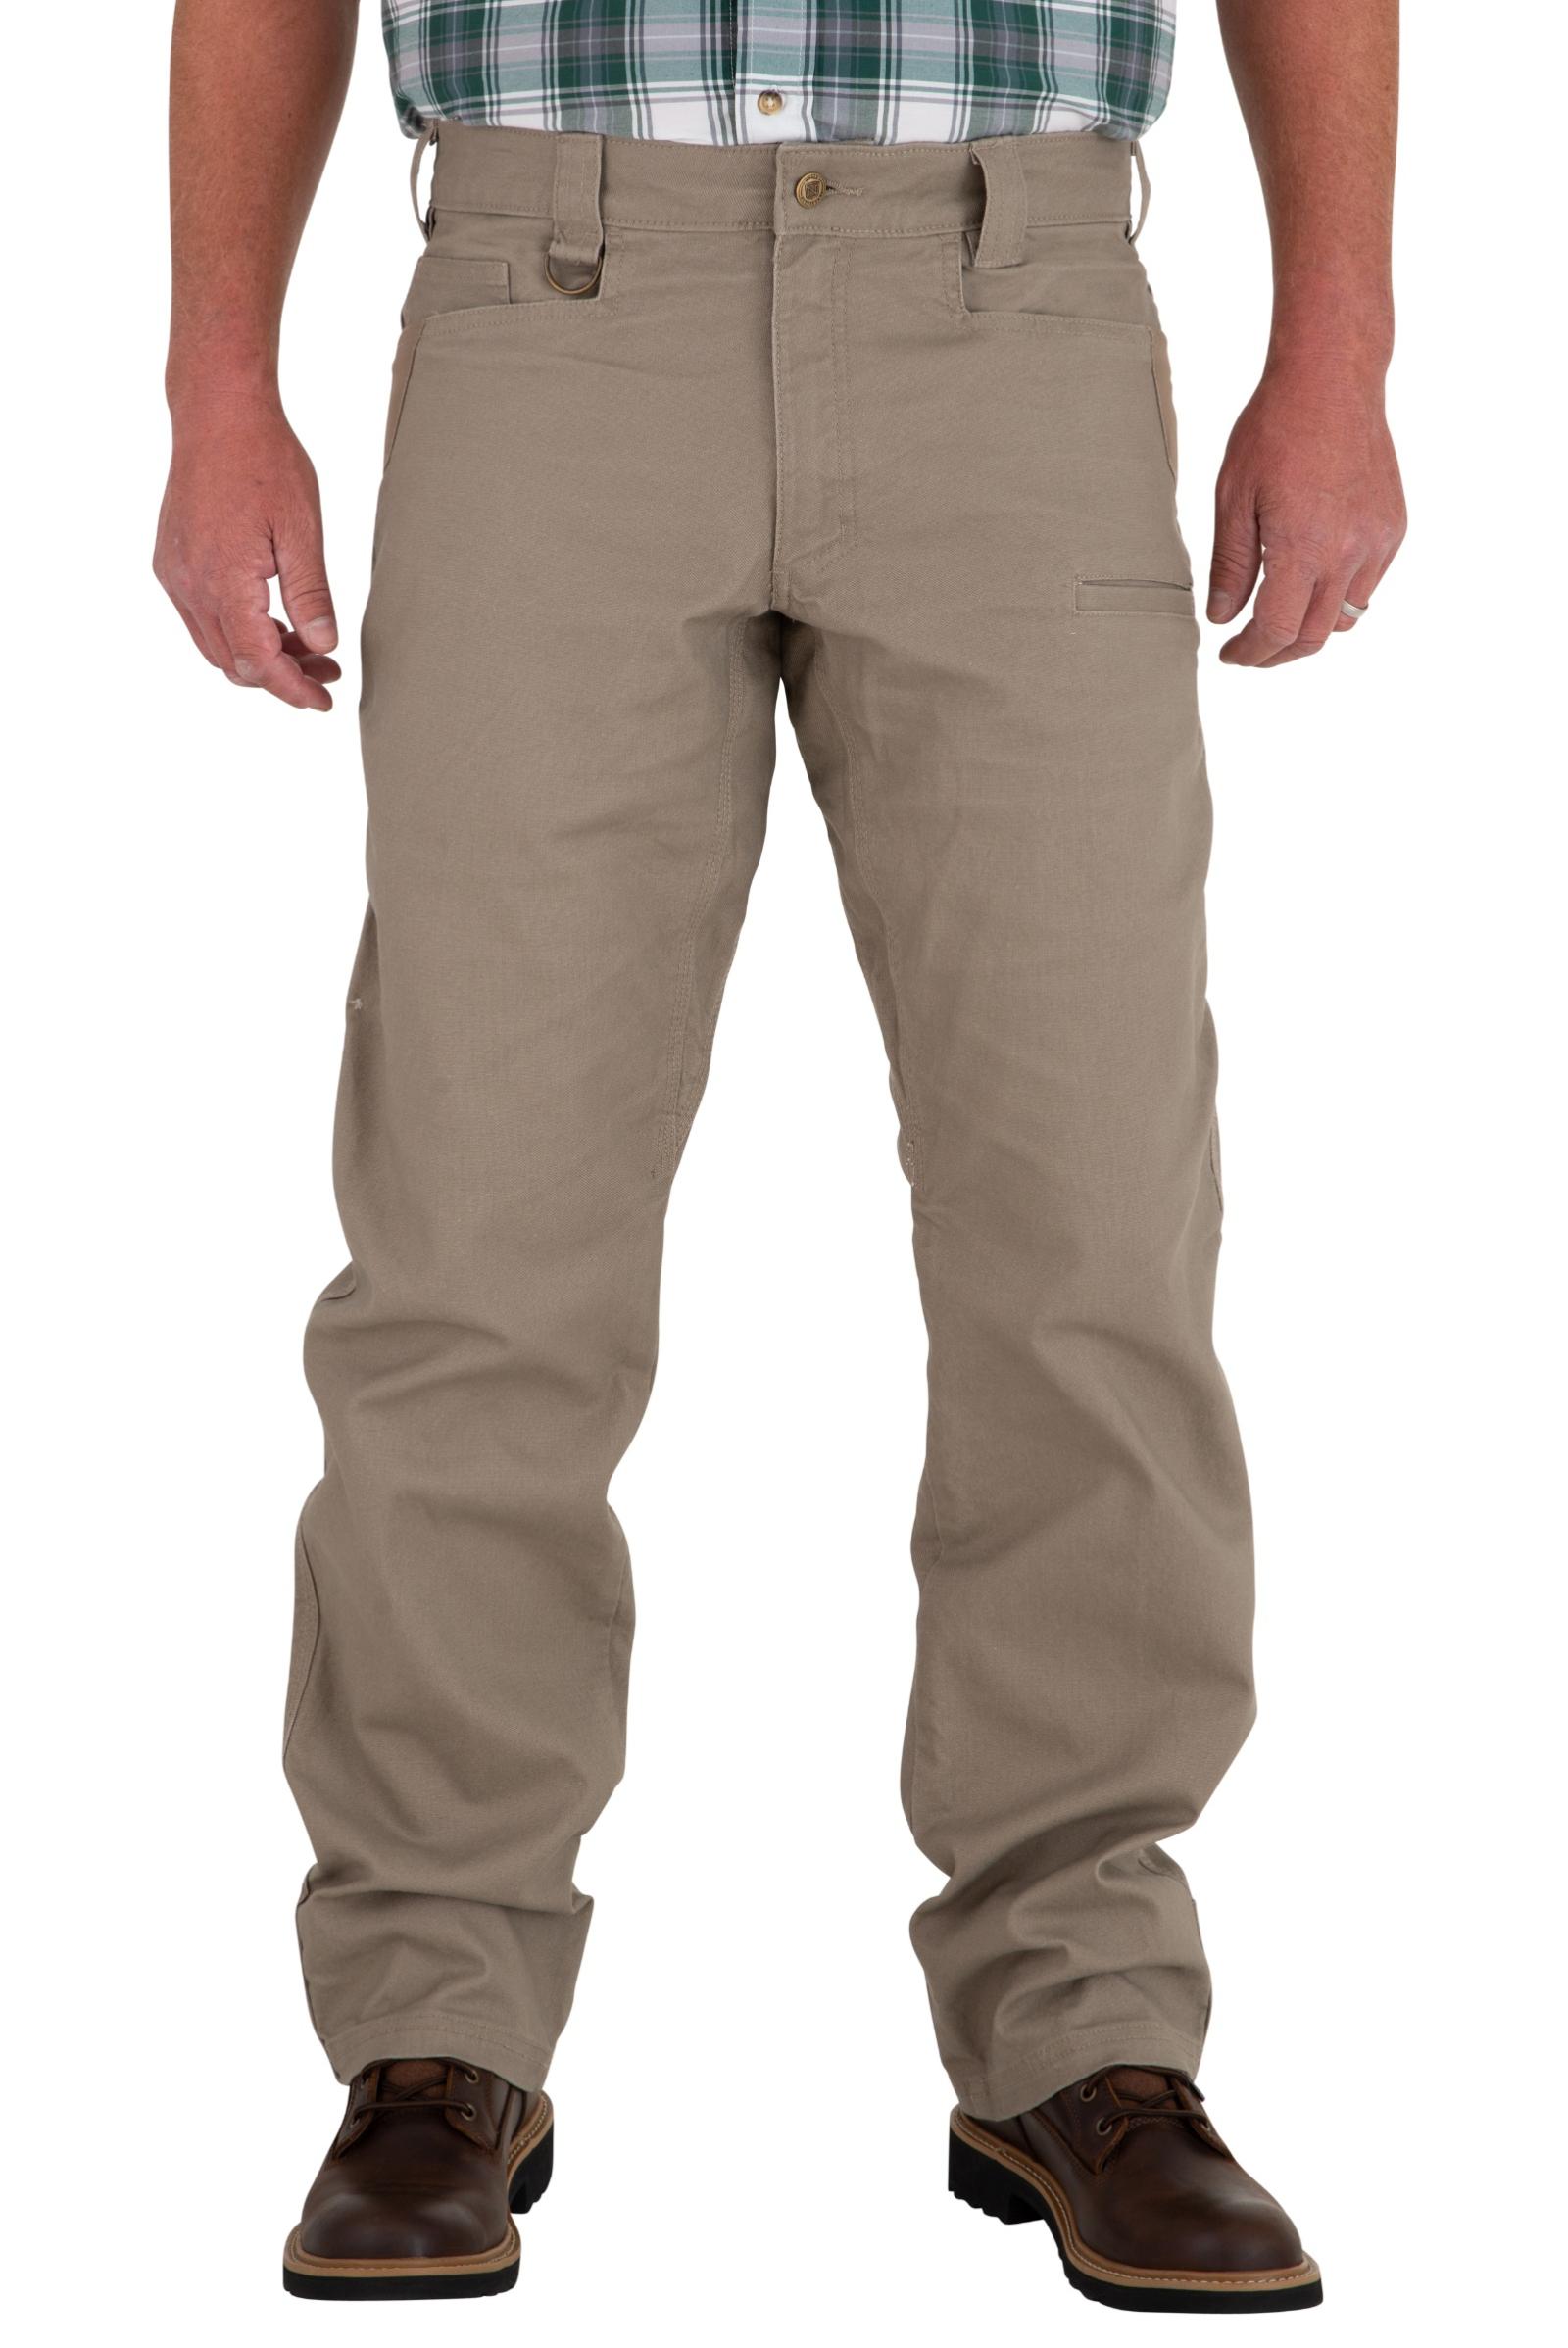 Noble Outfitters Men's FullFlexx HD Hammer Drill Canvas Work Pants